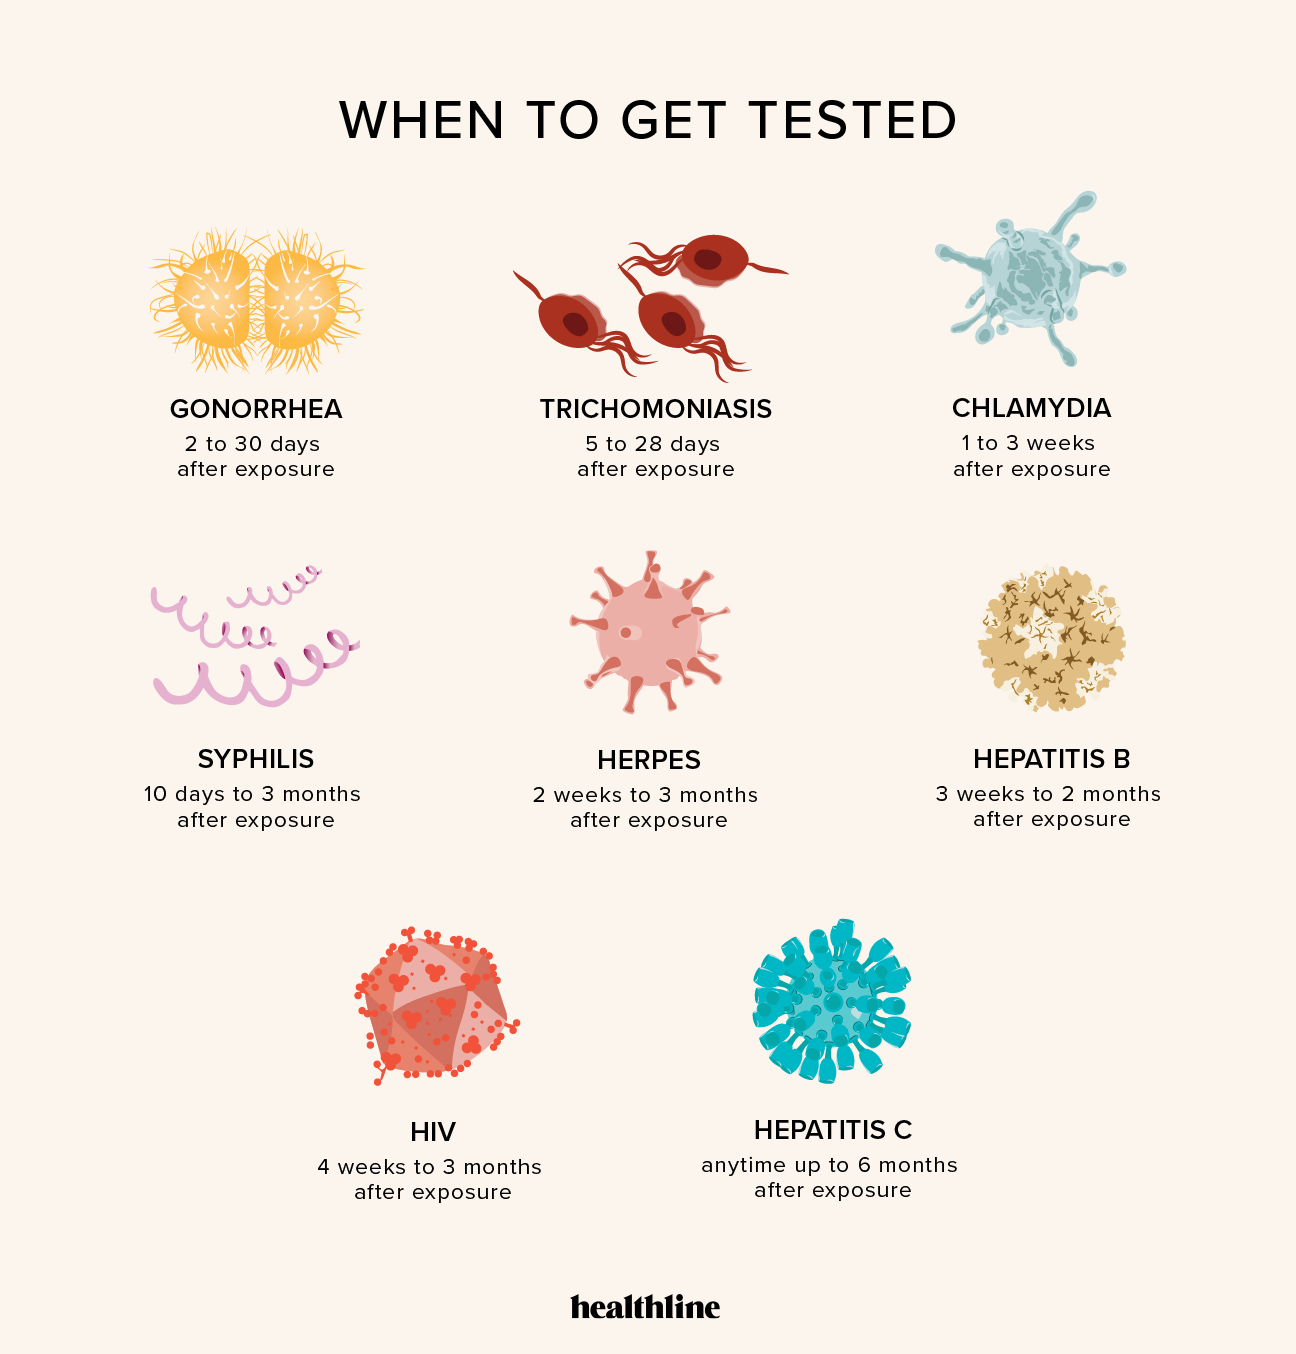 About STDcheck.com Fast, Easy to Read STD Testing Results